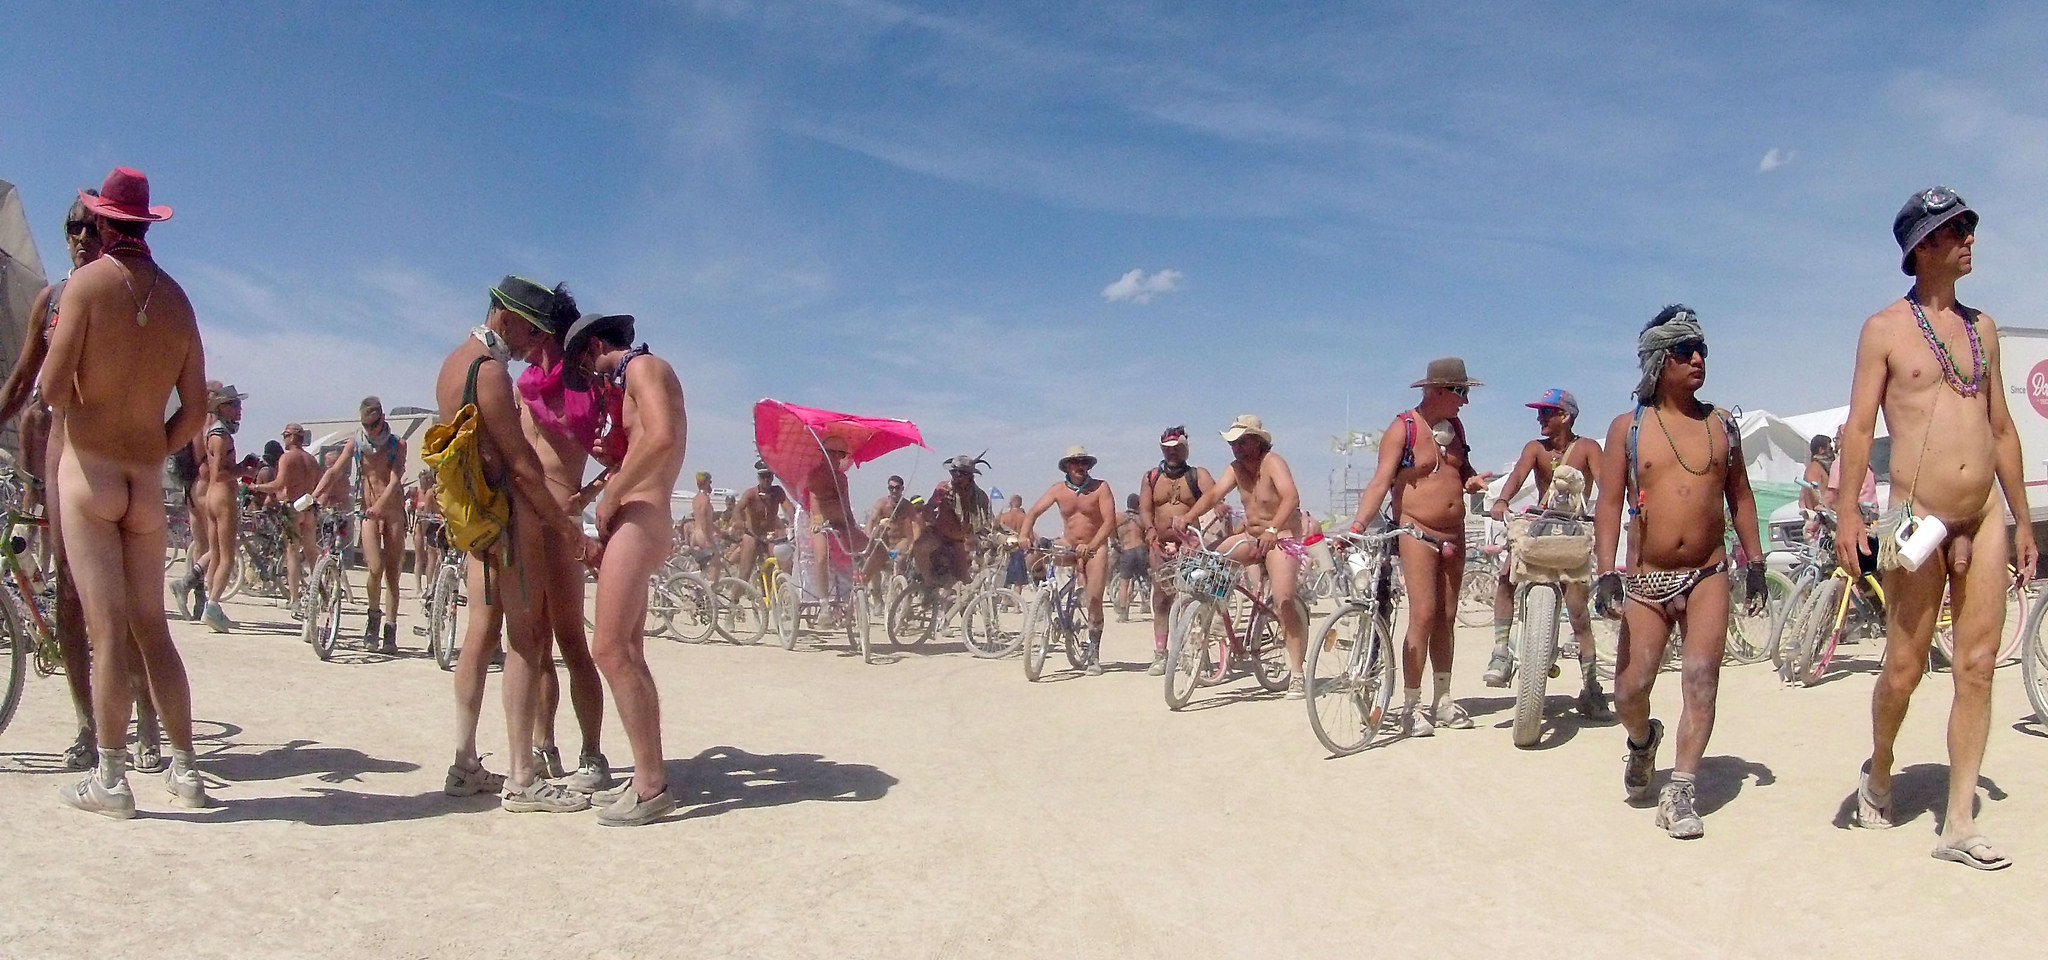 Naked and bold: a gallery of the hottest men at burning man